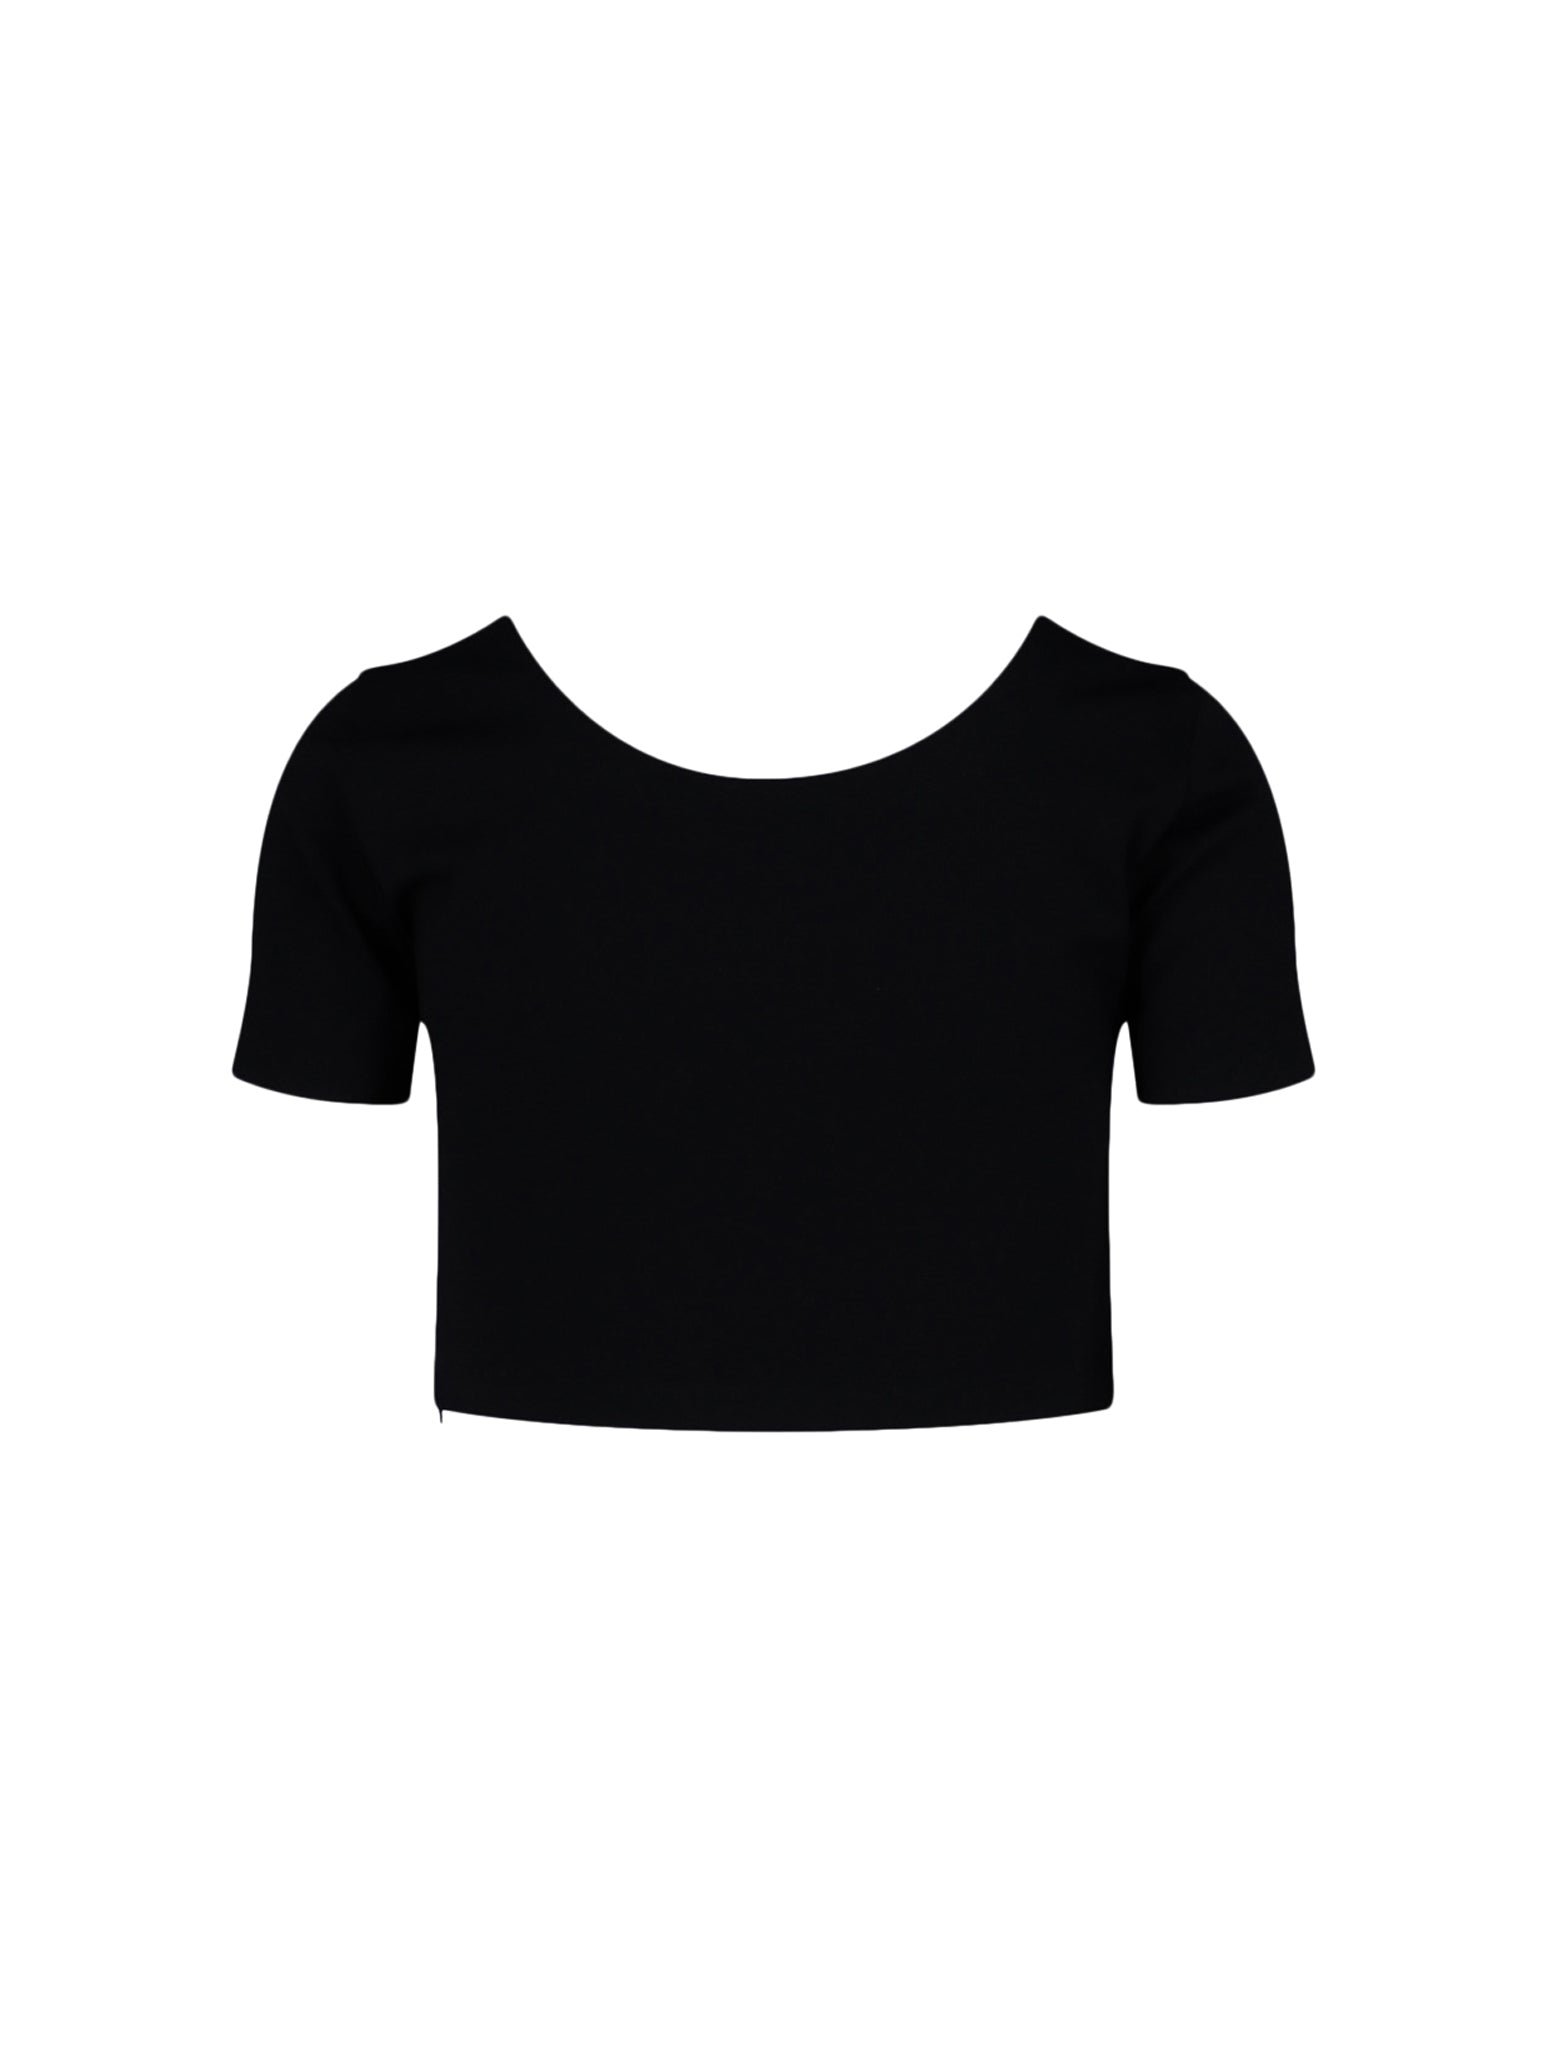 FITTED T-SHIRT IN SHAPING JERSEY